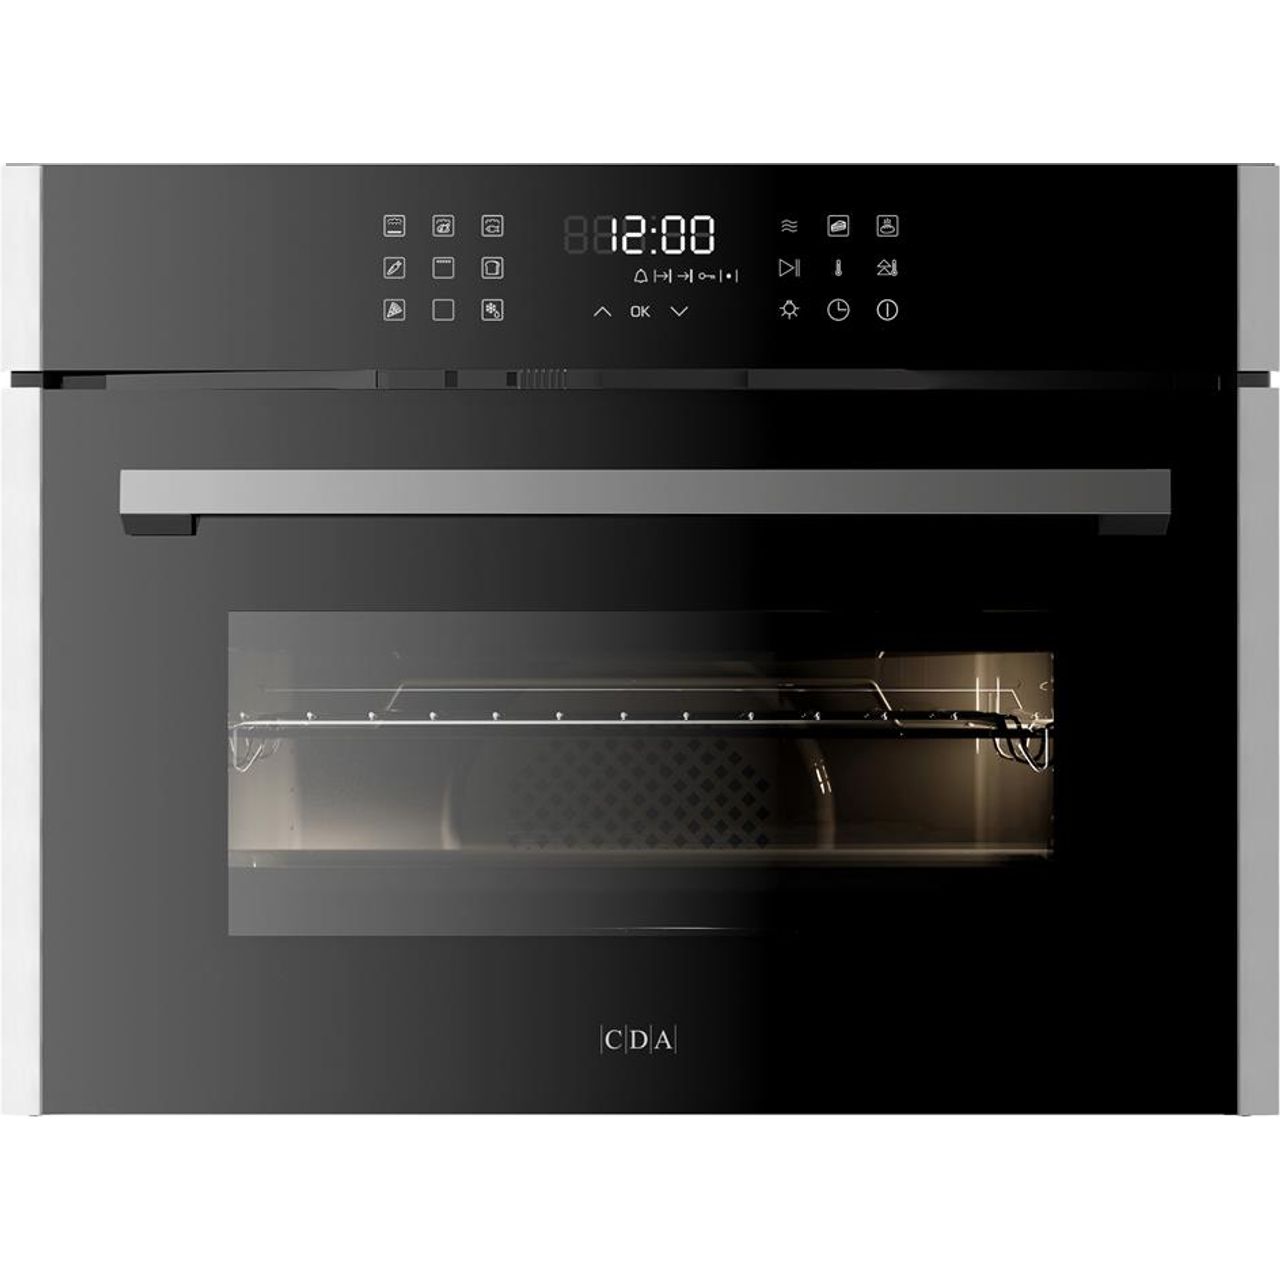 CDA VK703SS Built In Compact Steam Oven Review